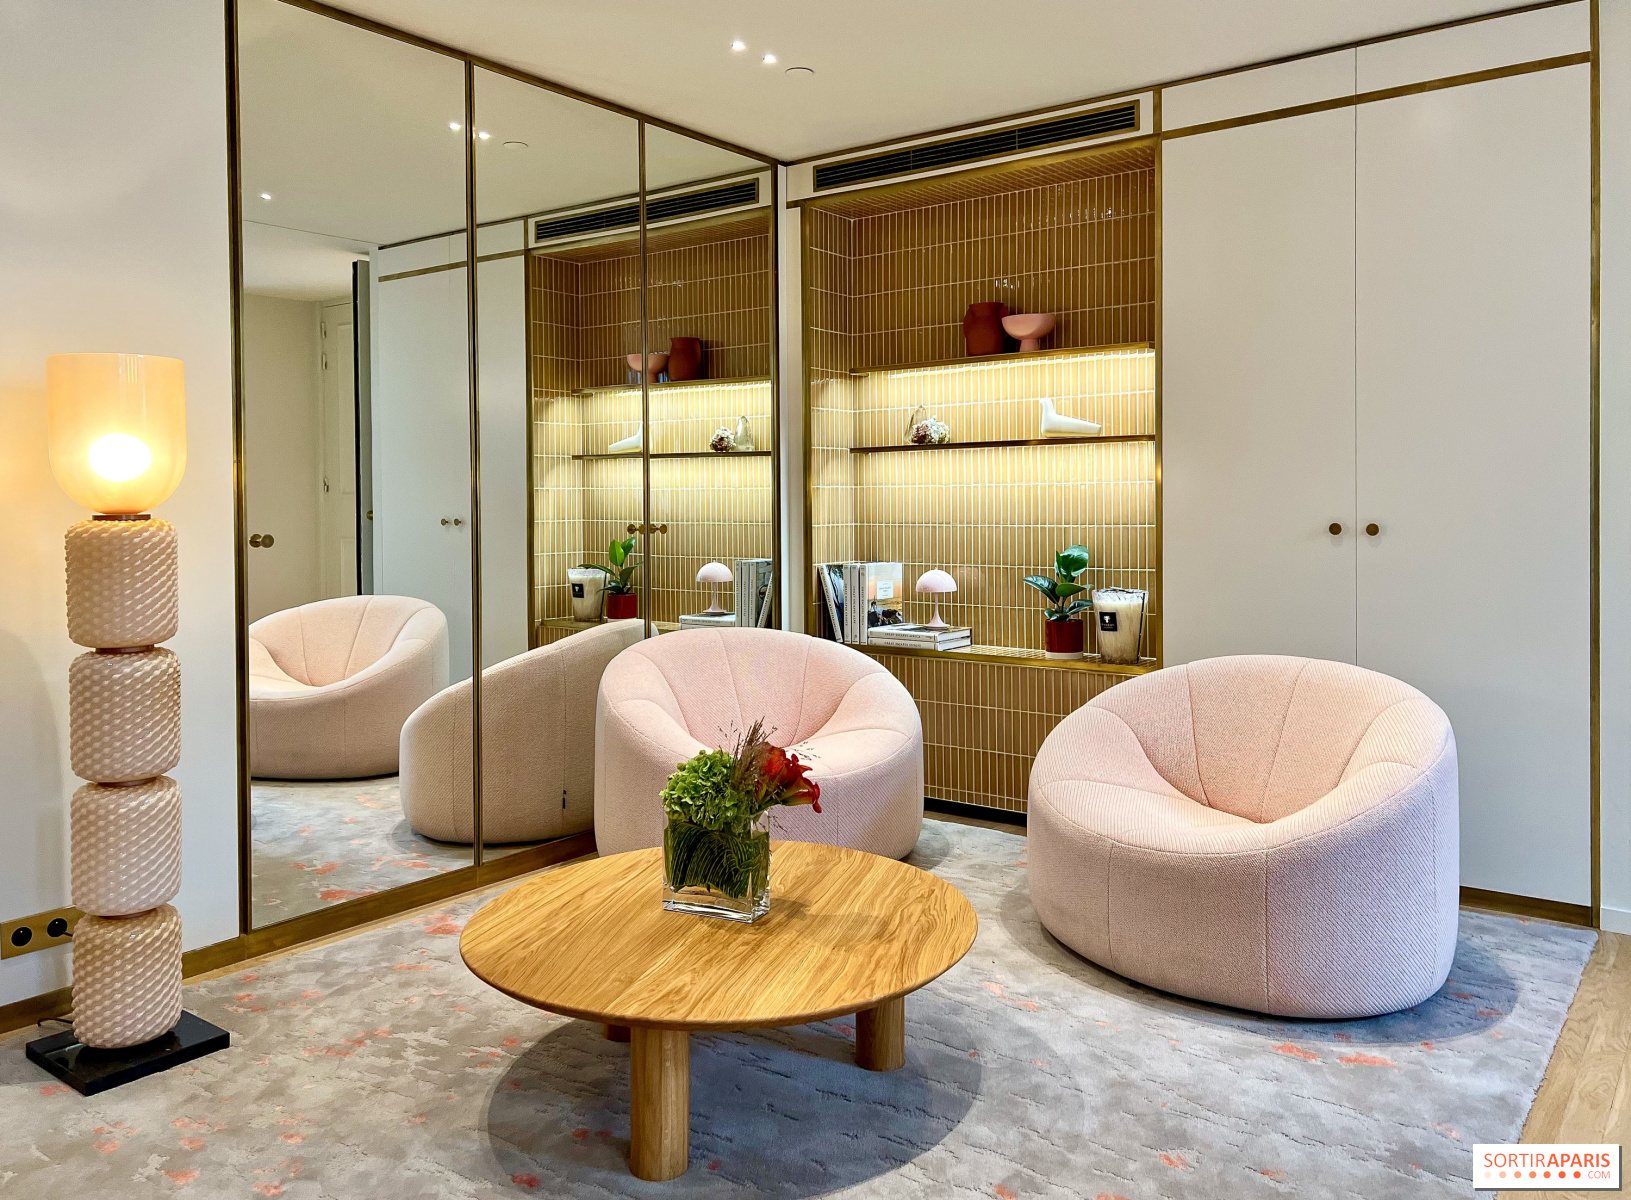 A Spa to pamper your luxury bags at the Bon Marché Rive Gauche 